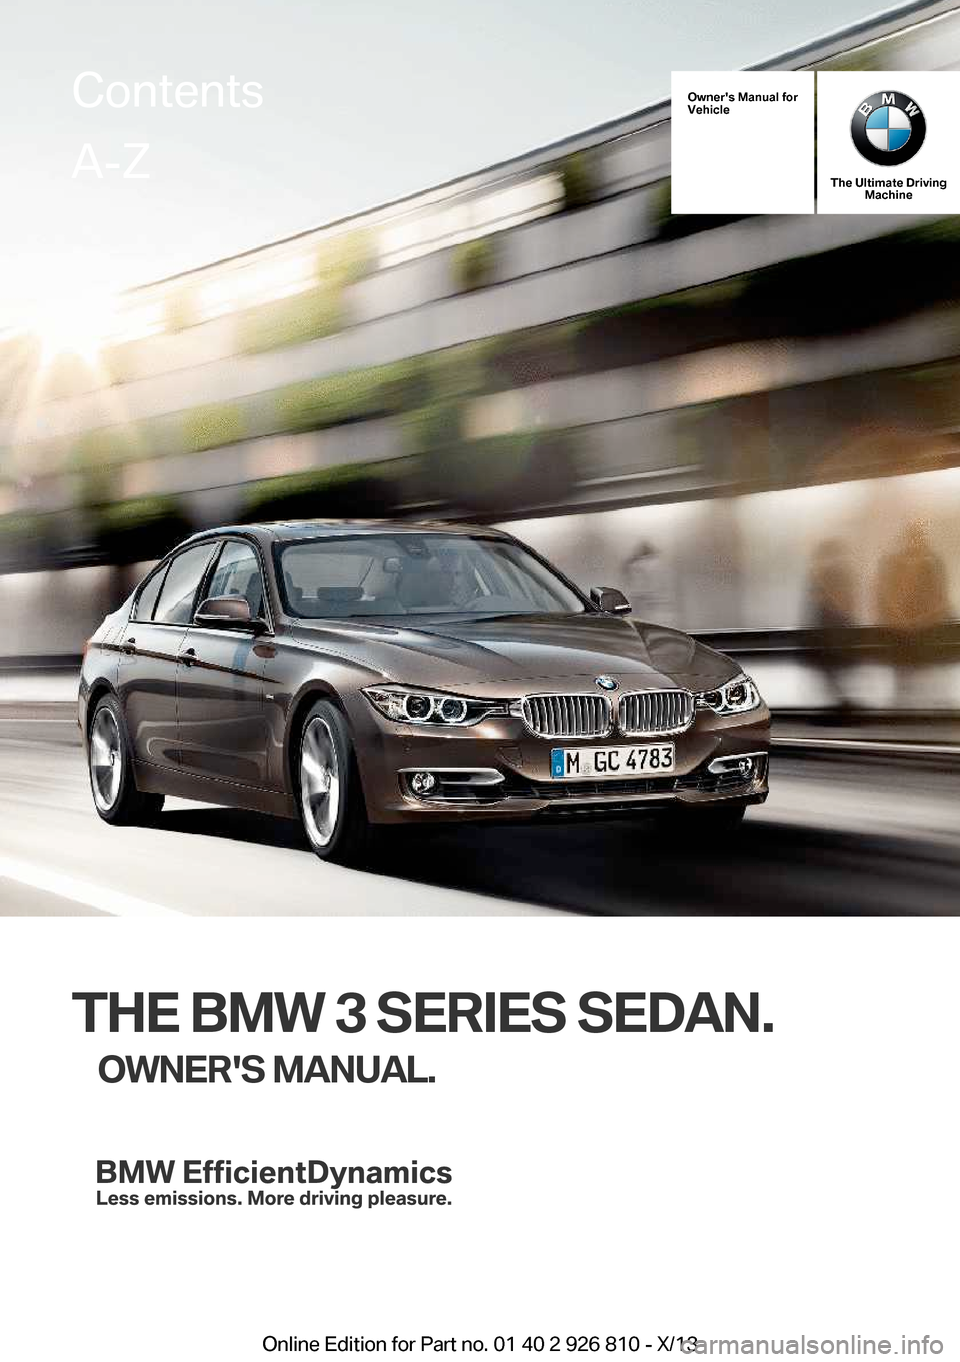 BMW 3 SERIES SEDAN 2013 F30 Owners Manual Owners Manual for
Vehicle
The Ultimate Driving Machine
THE BMW 3 SERIES SEDAN.
OWNERS MANUAL.
ContentsA-Z
Online Edition for Part no. 01 40 2 926 810 - X/13   